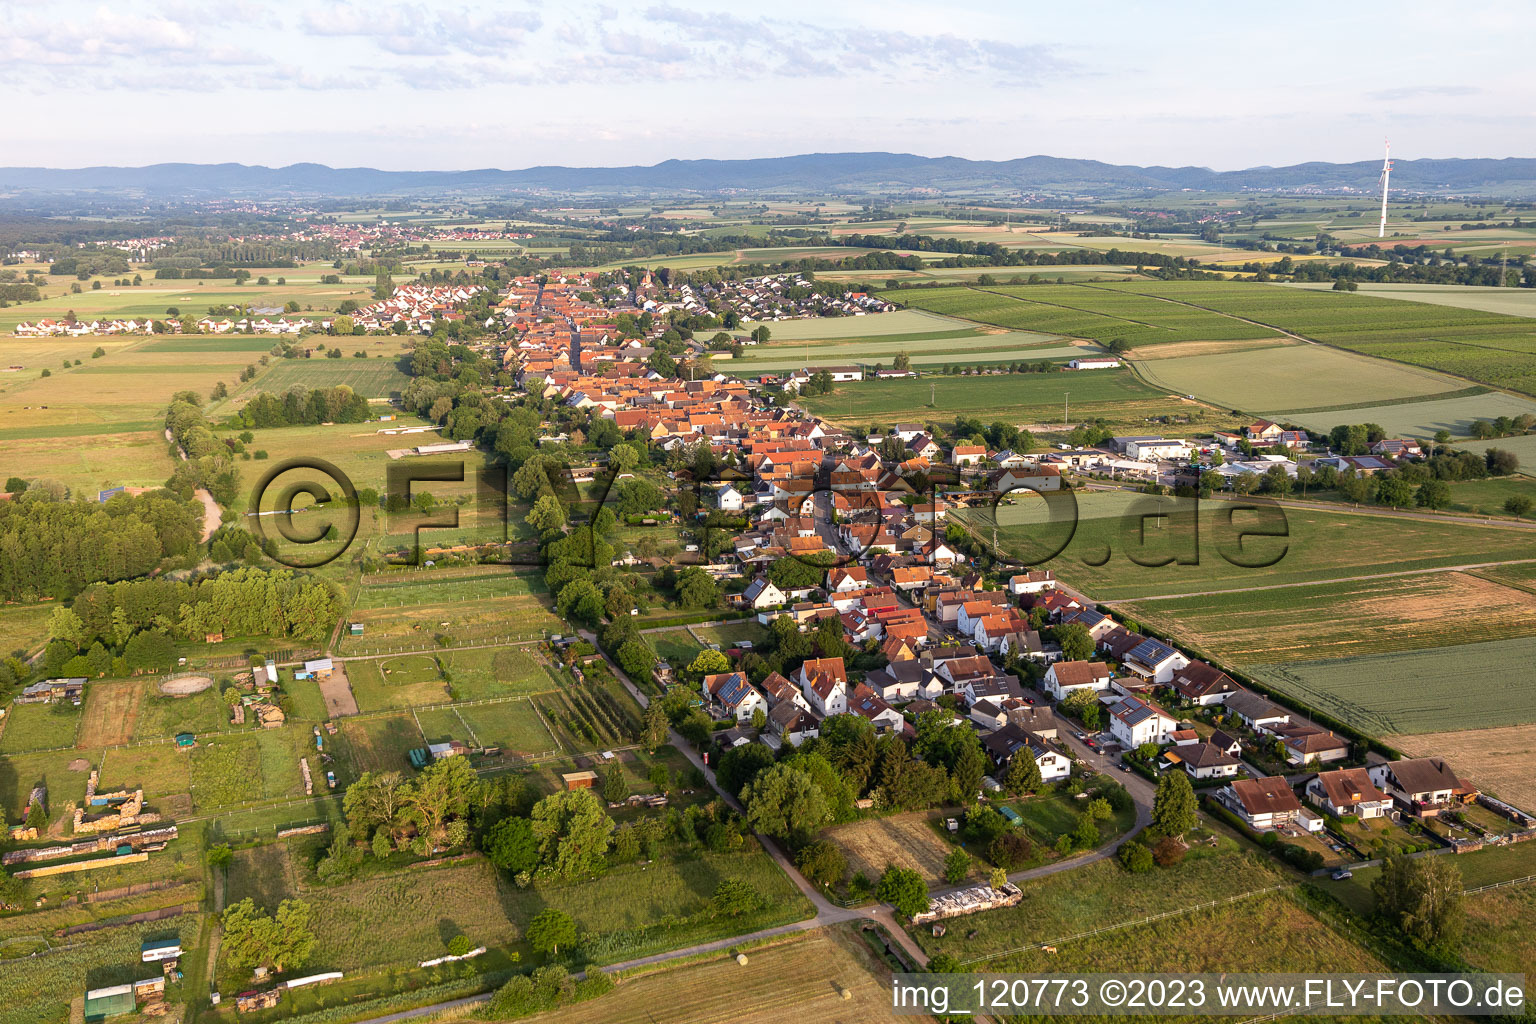 Aerial view of Village - view on the edge of agricultural fields and farmland in Freckenfeld in the state Rhineland-Palatinate, Germany